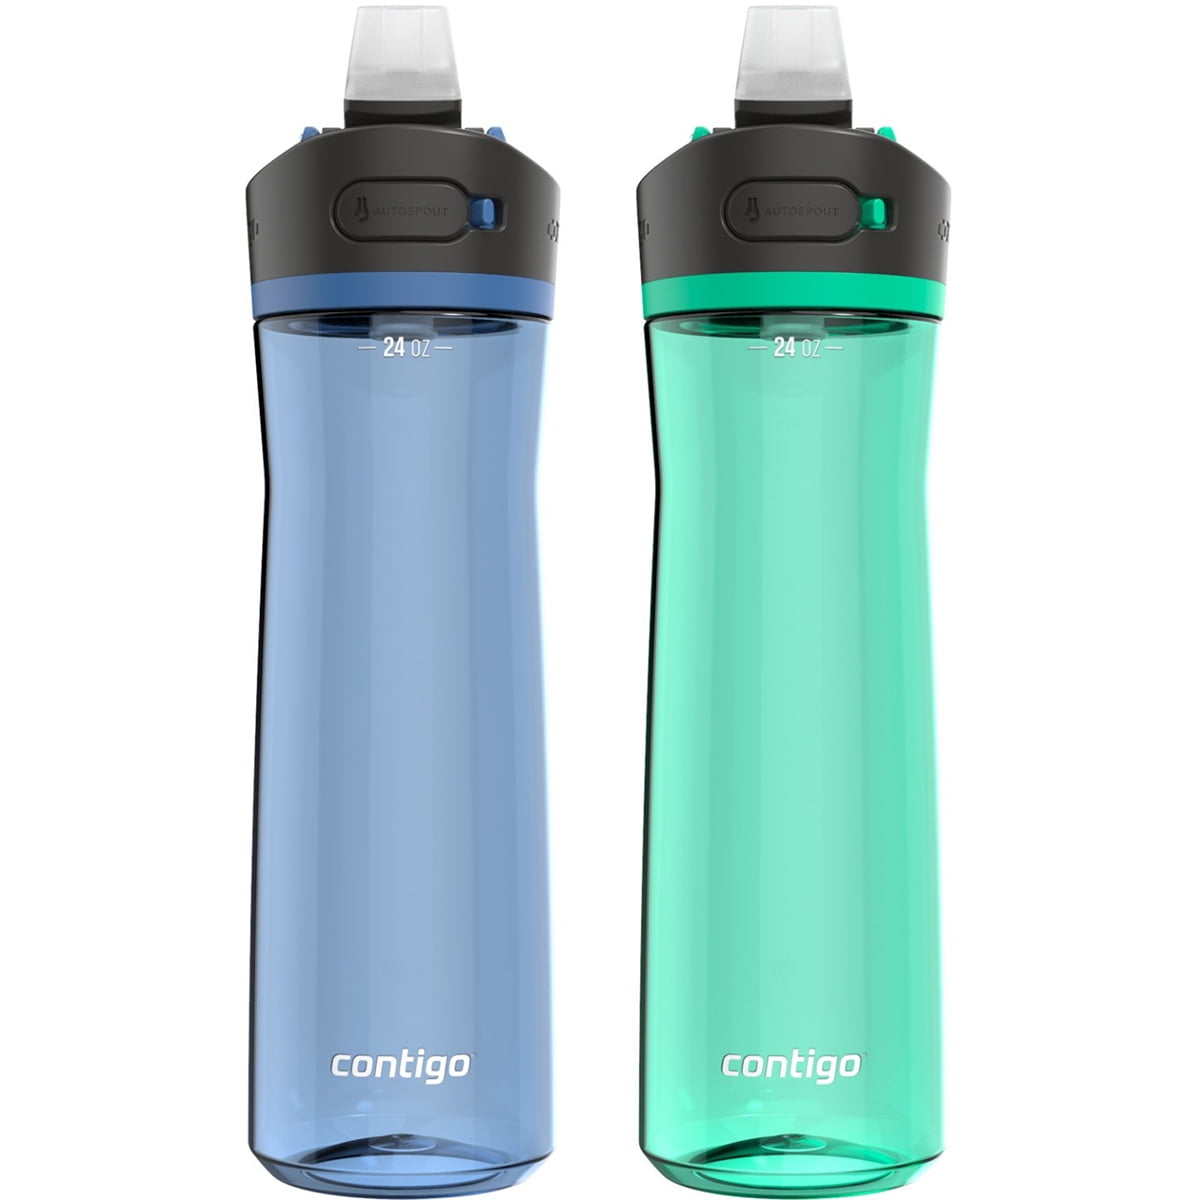 Contigo Insulated Shaker Bottles, 24 oz (2 Pack) - Black/Dusted Navy - -  Ourland Outdoor